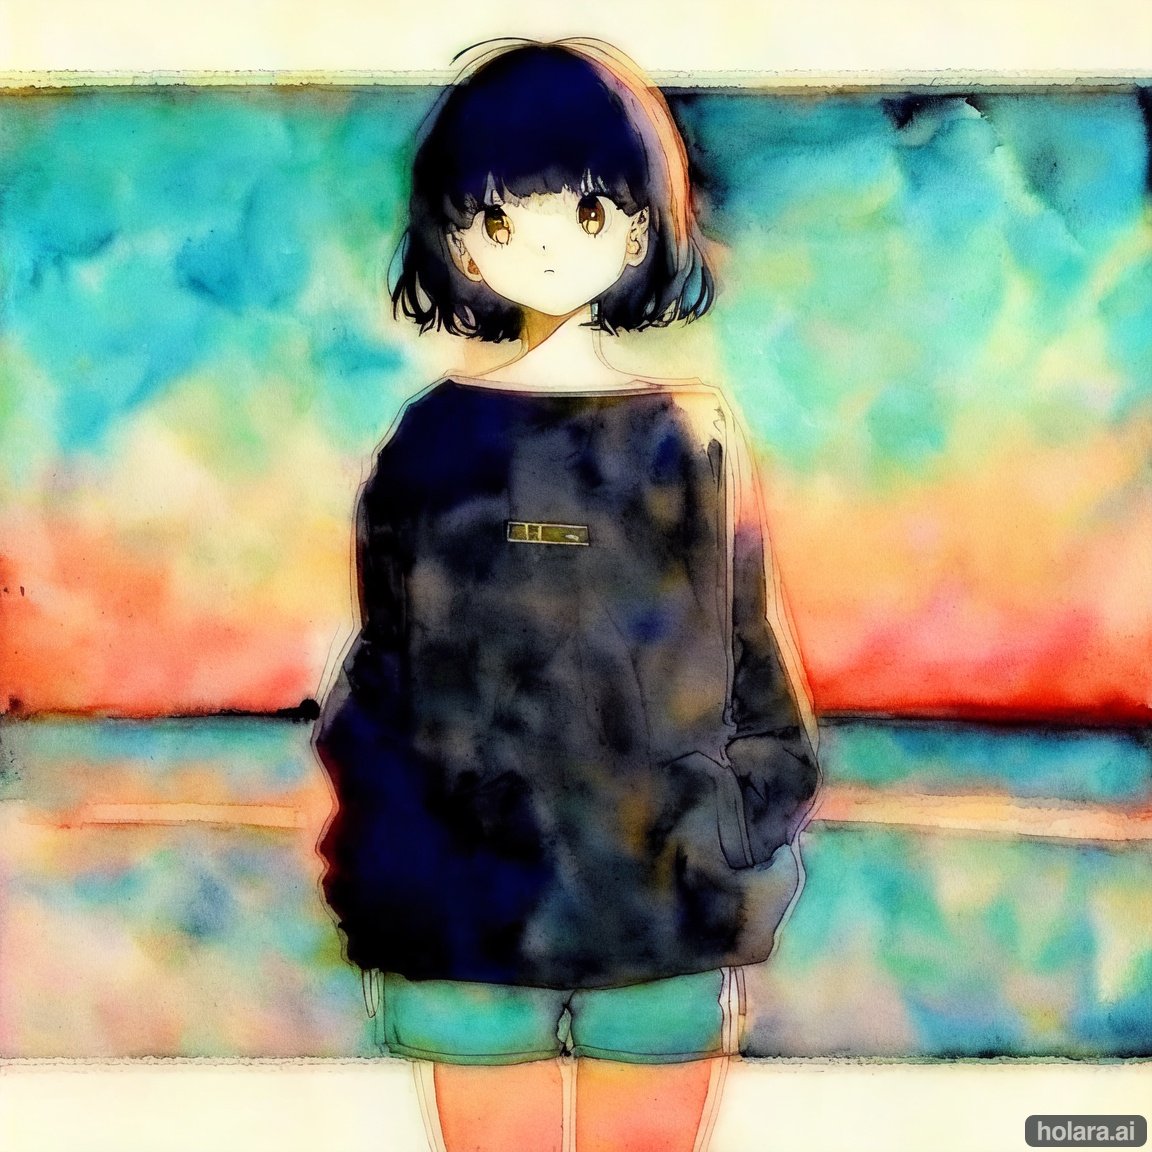 Image of Small girl, oversize sweater, large sweater, athletic shorts, short hair, (lineart)+++, traditional media, watercolor, (retro)++, night sky, summer beach, sunset, phenomenal, phenomenal lighting, depth of field, aesthetic